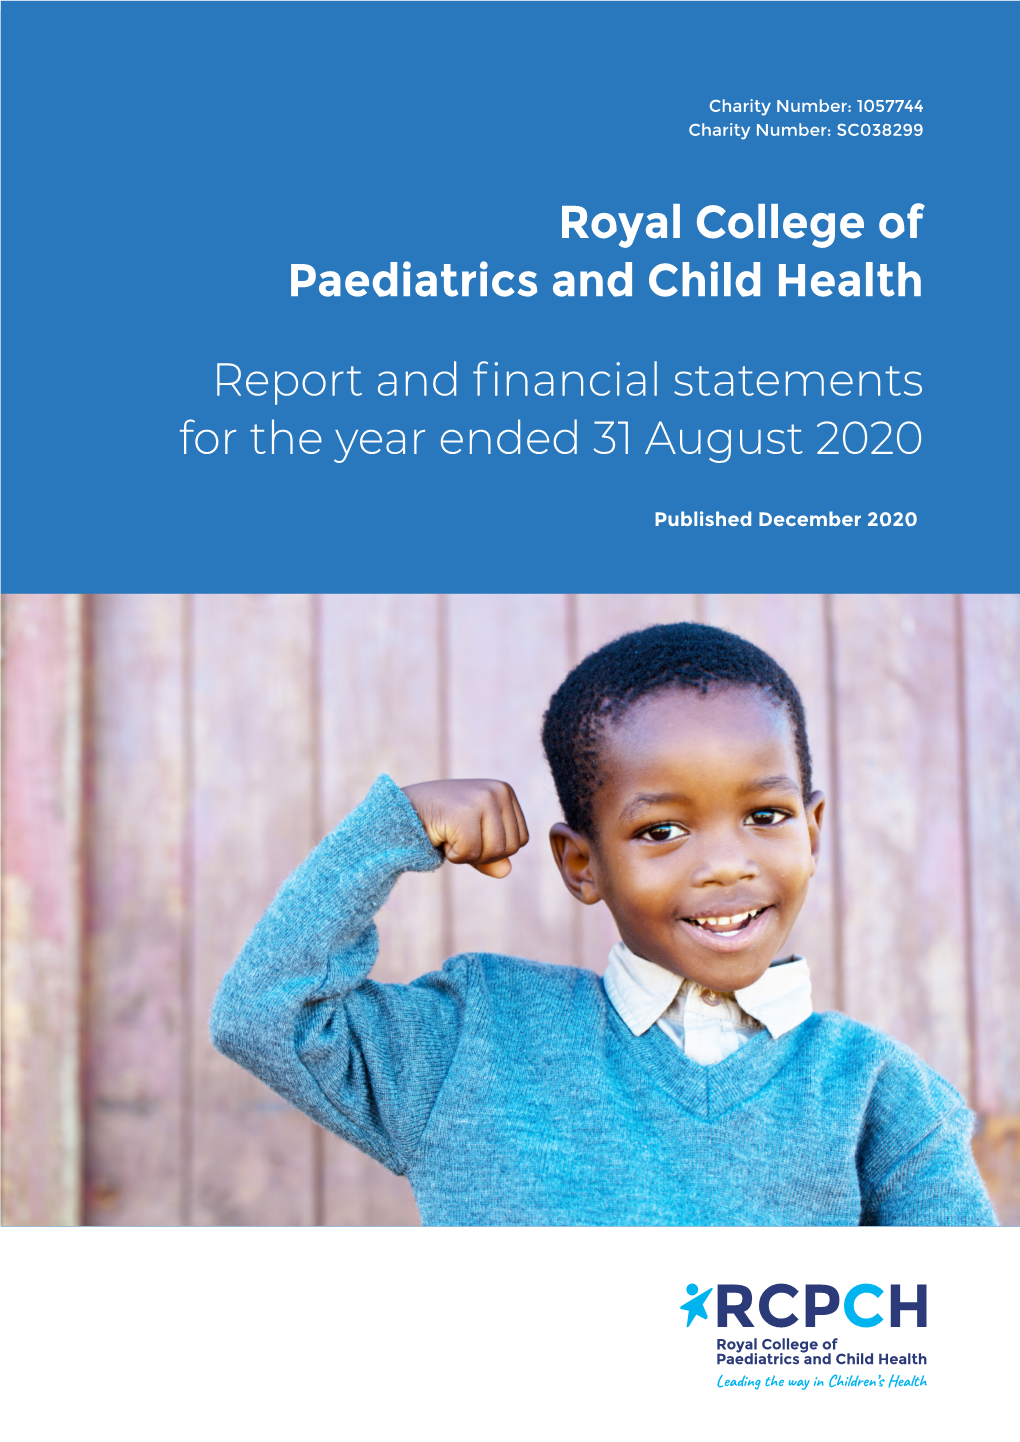 Royal College of Paediatrics and Child Health Report and Financial Statements for the Year Ending 31 August 2020